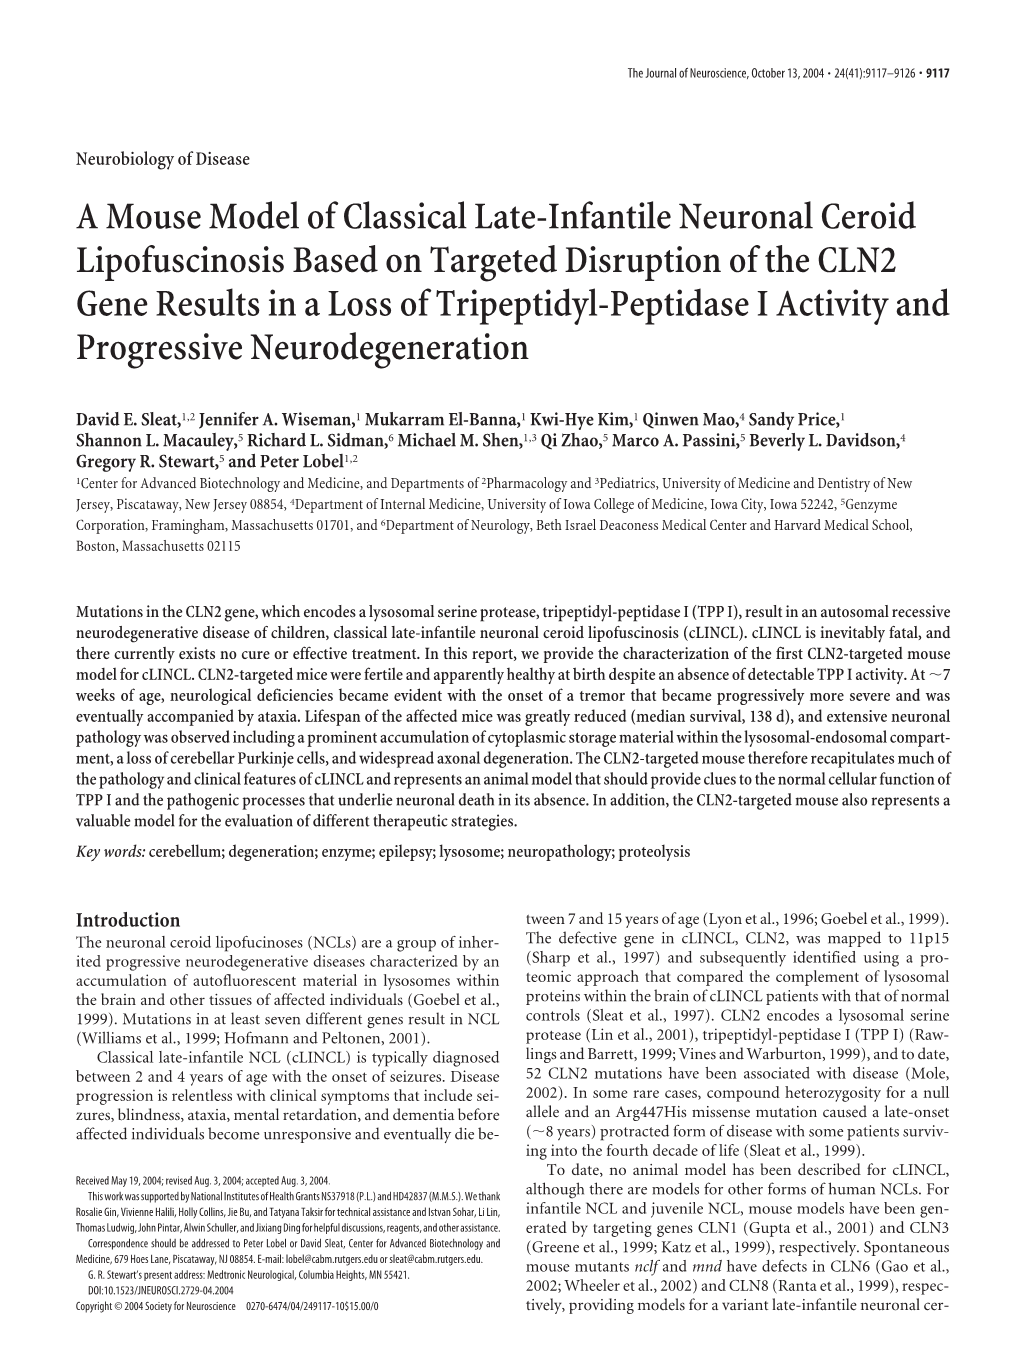 A Mouse Model of Classical Late-Infantile Neuronal Ceroid Lipofuscinosis Based on Targeted Disruption of the CLN2 Gene Results I